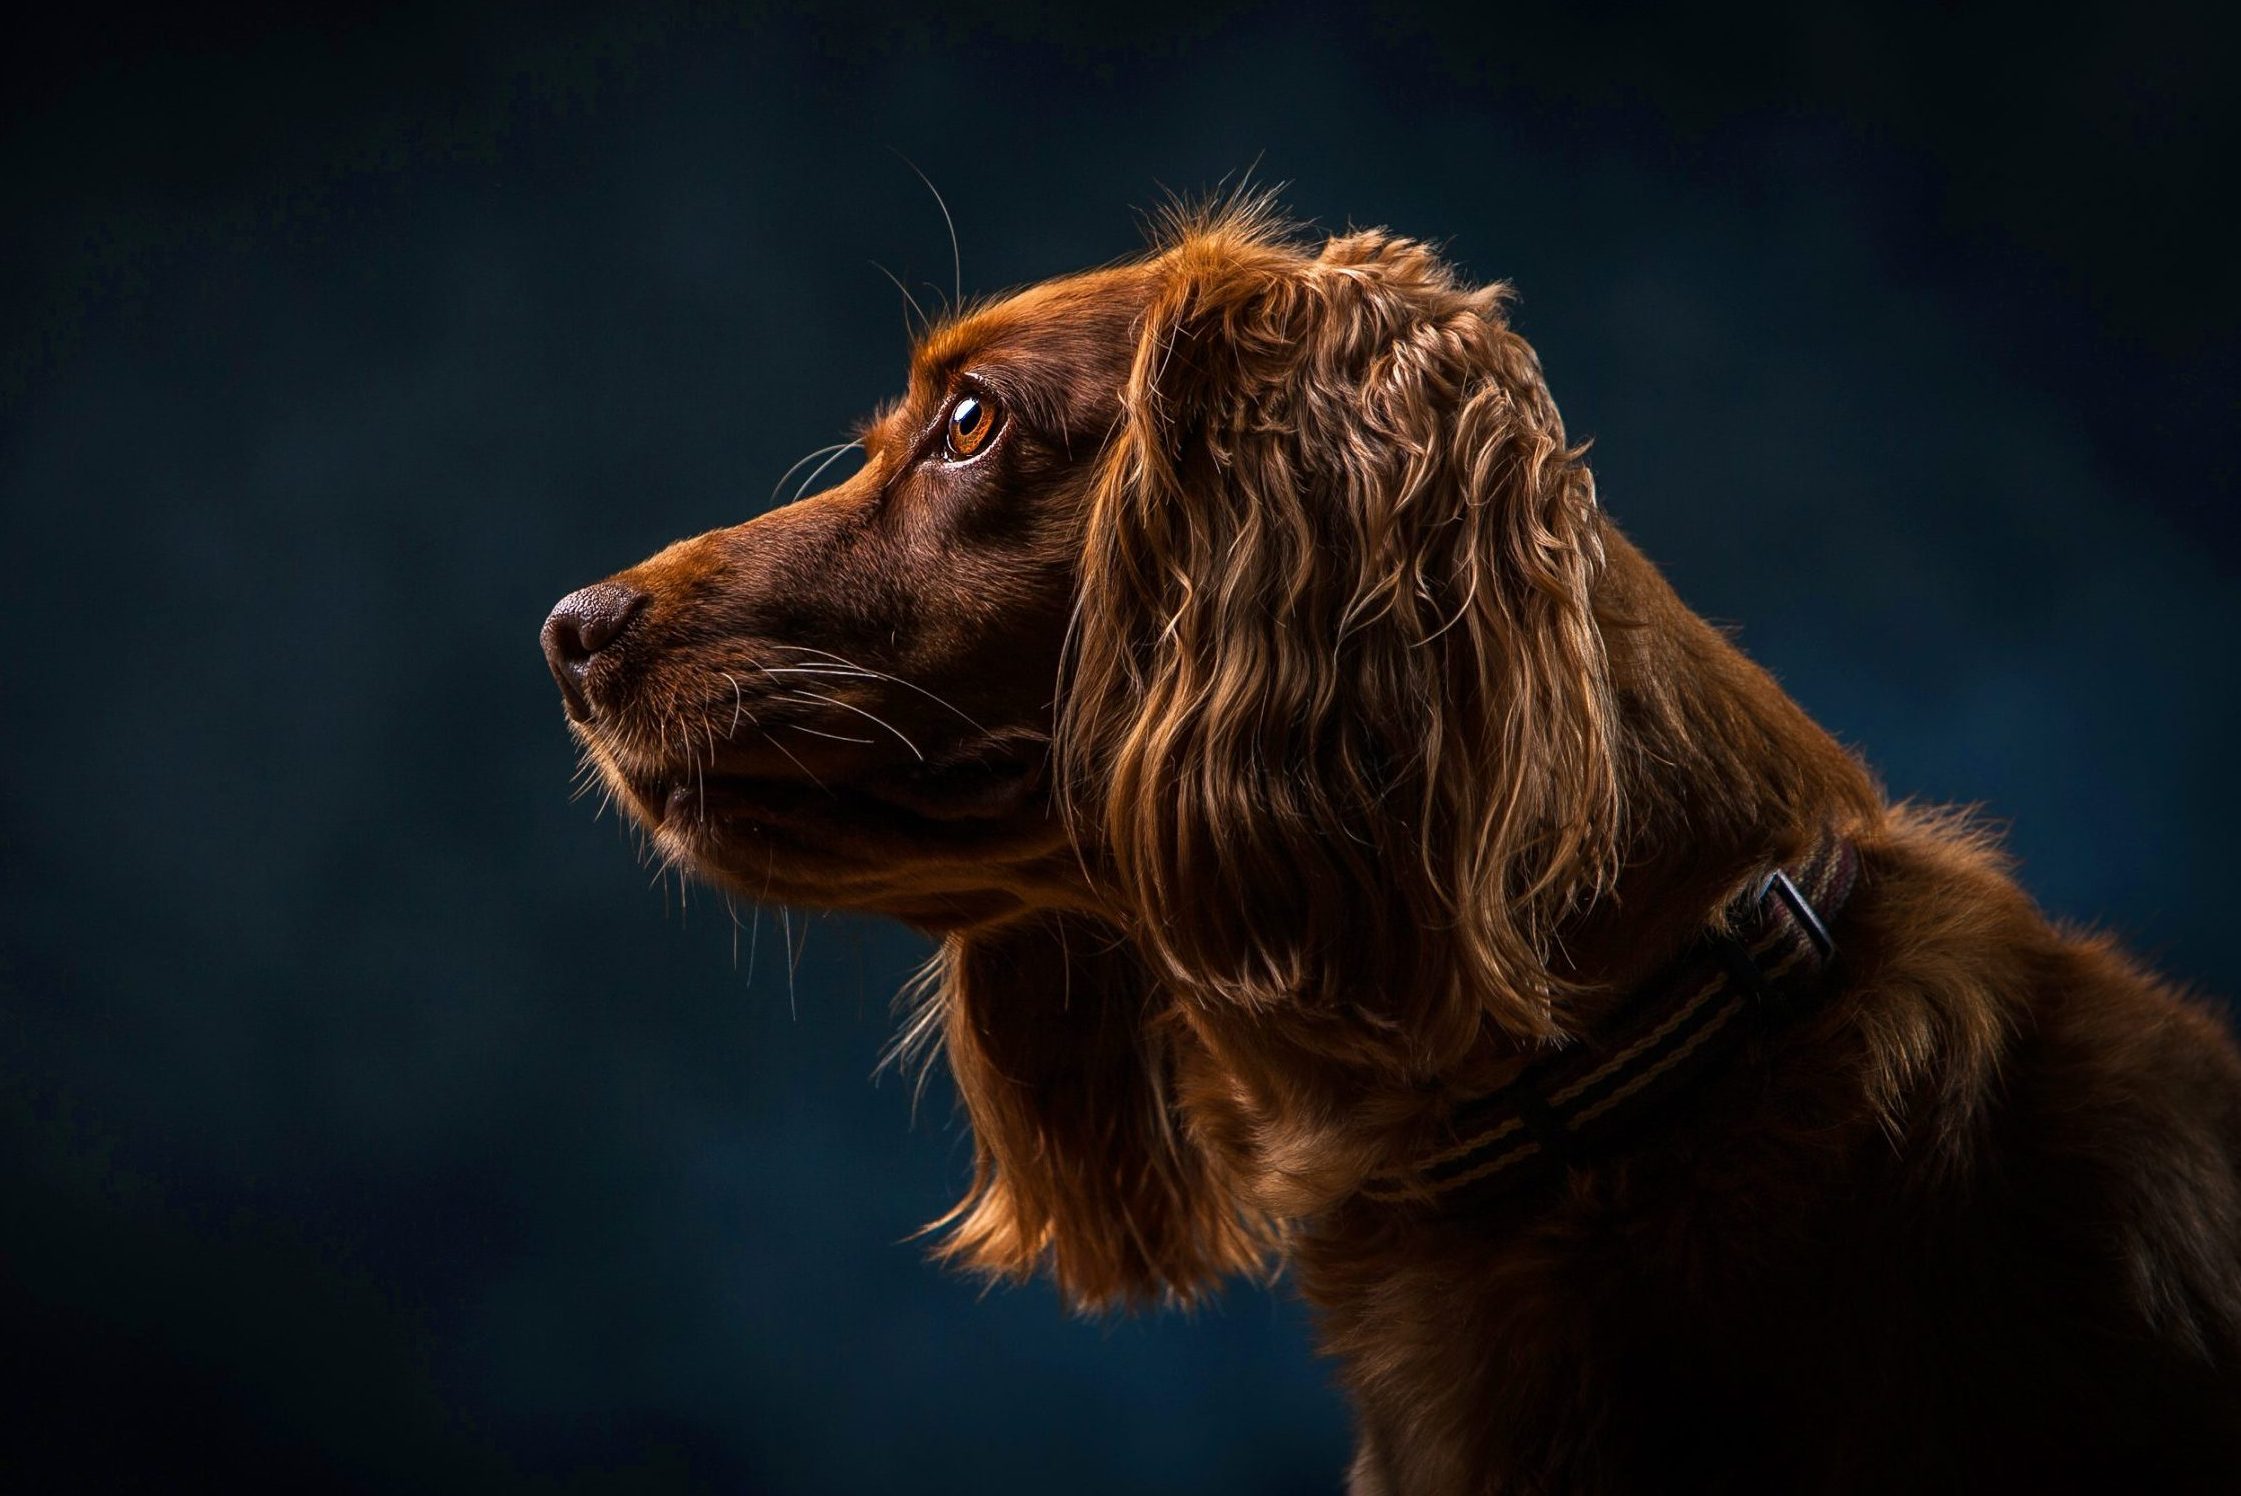 Can Dogs See in the Dark? Learn About Dogs and Night Vision